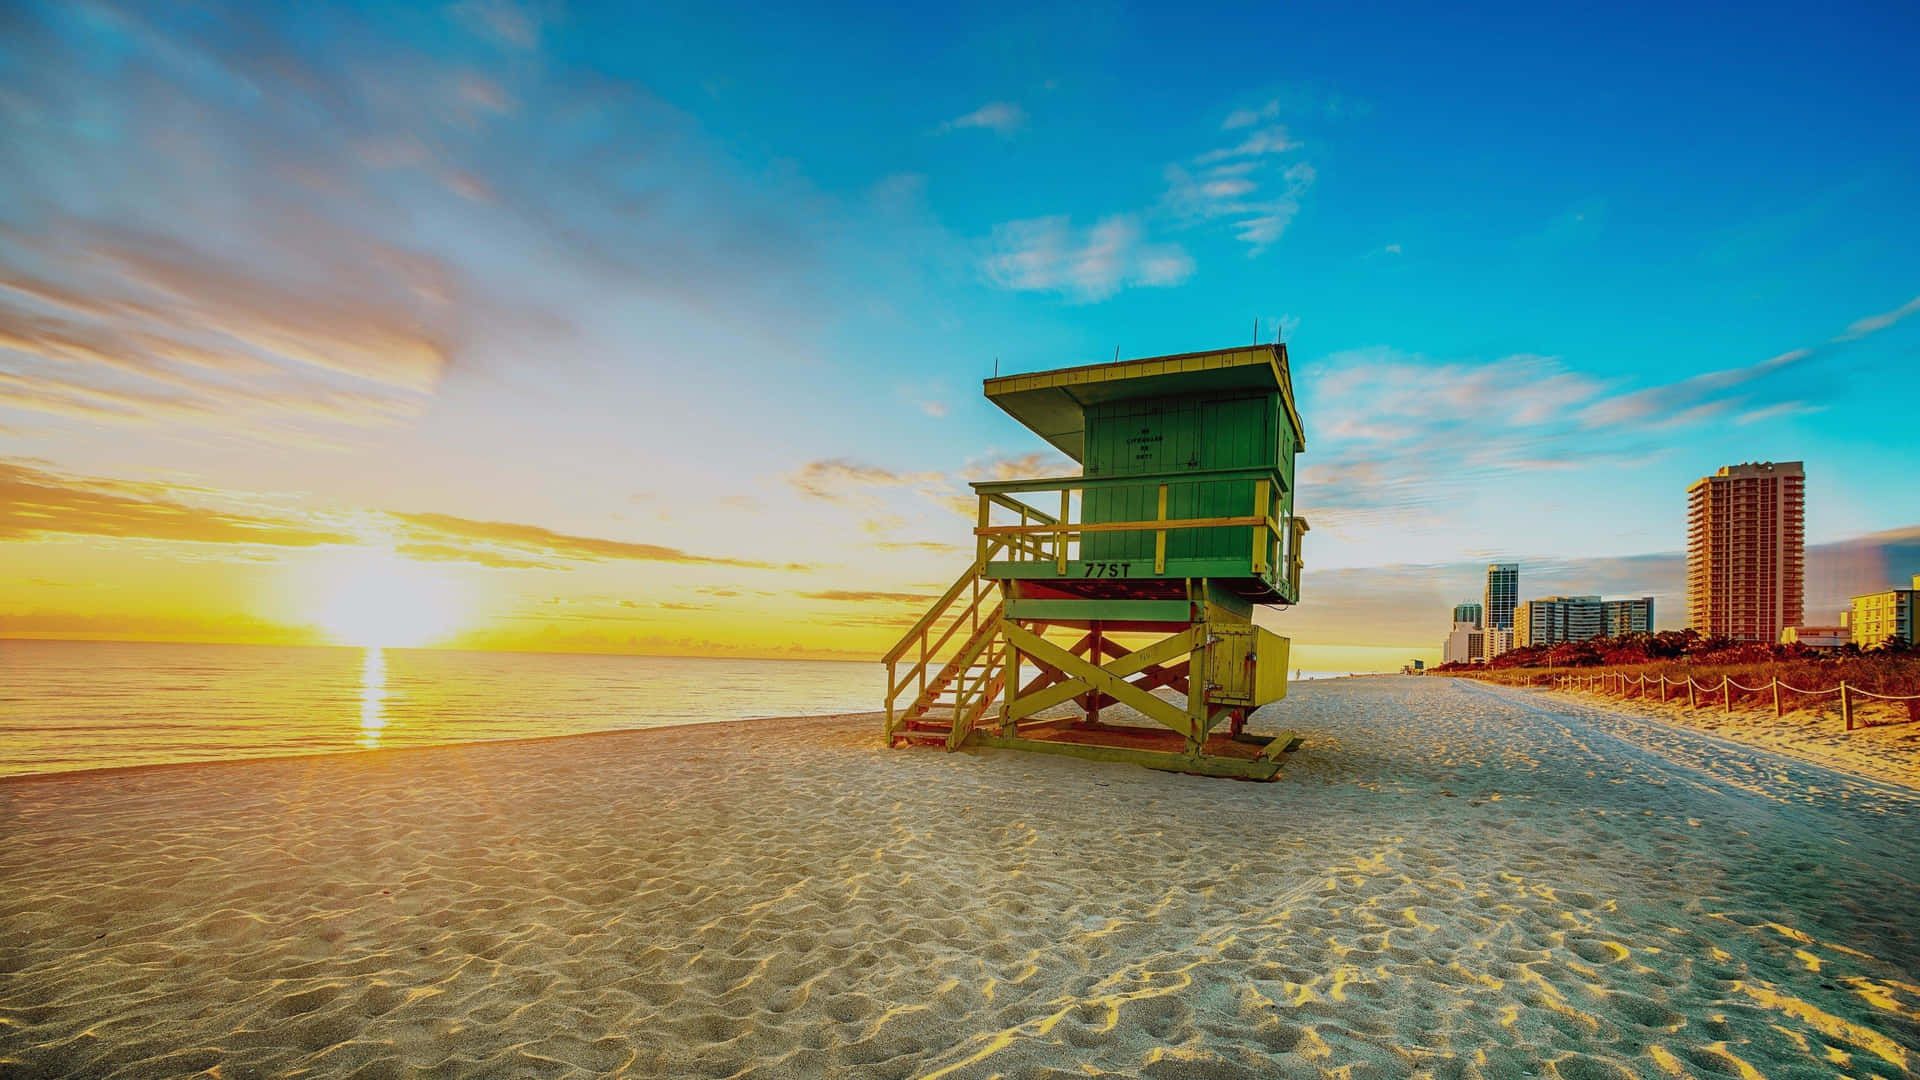 A lifeguard tower on a beach at sunset - Miami